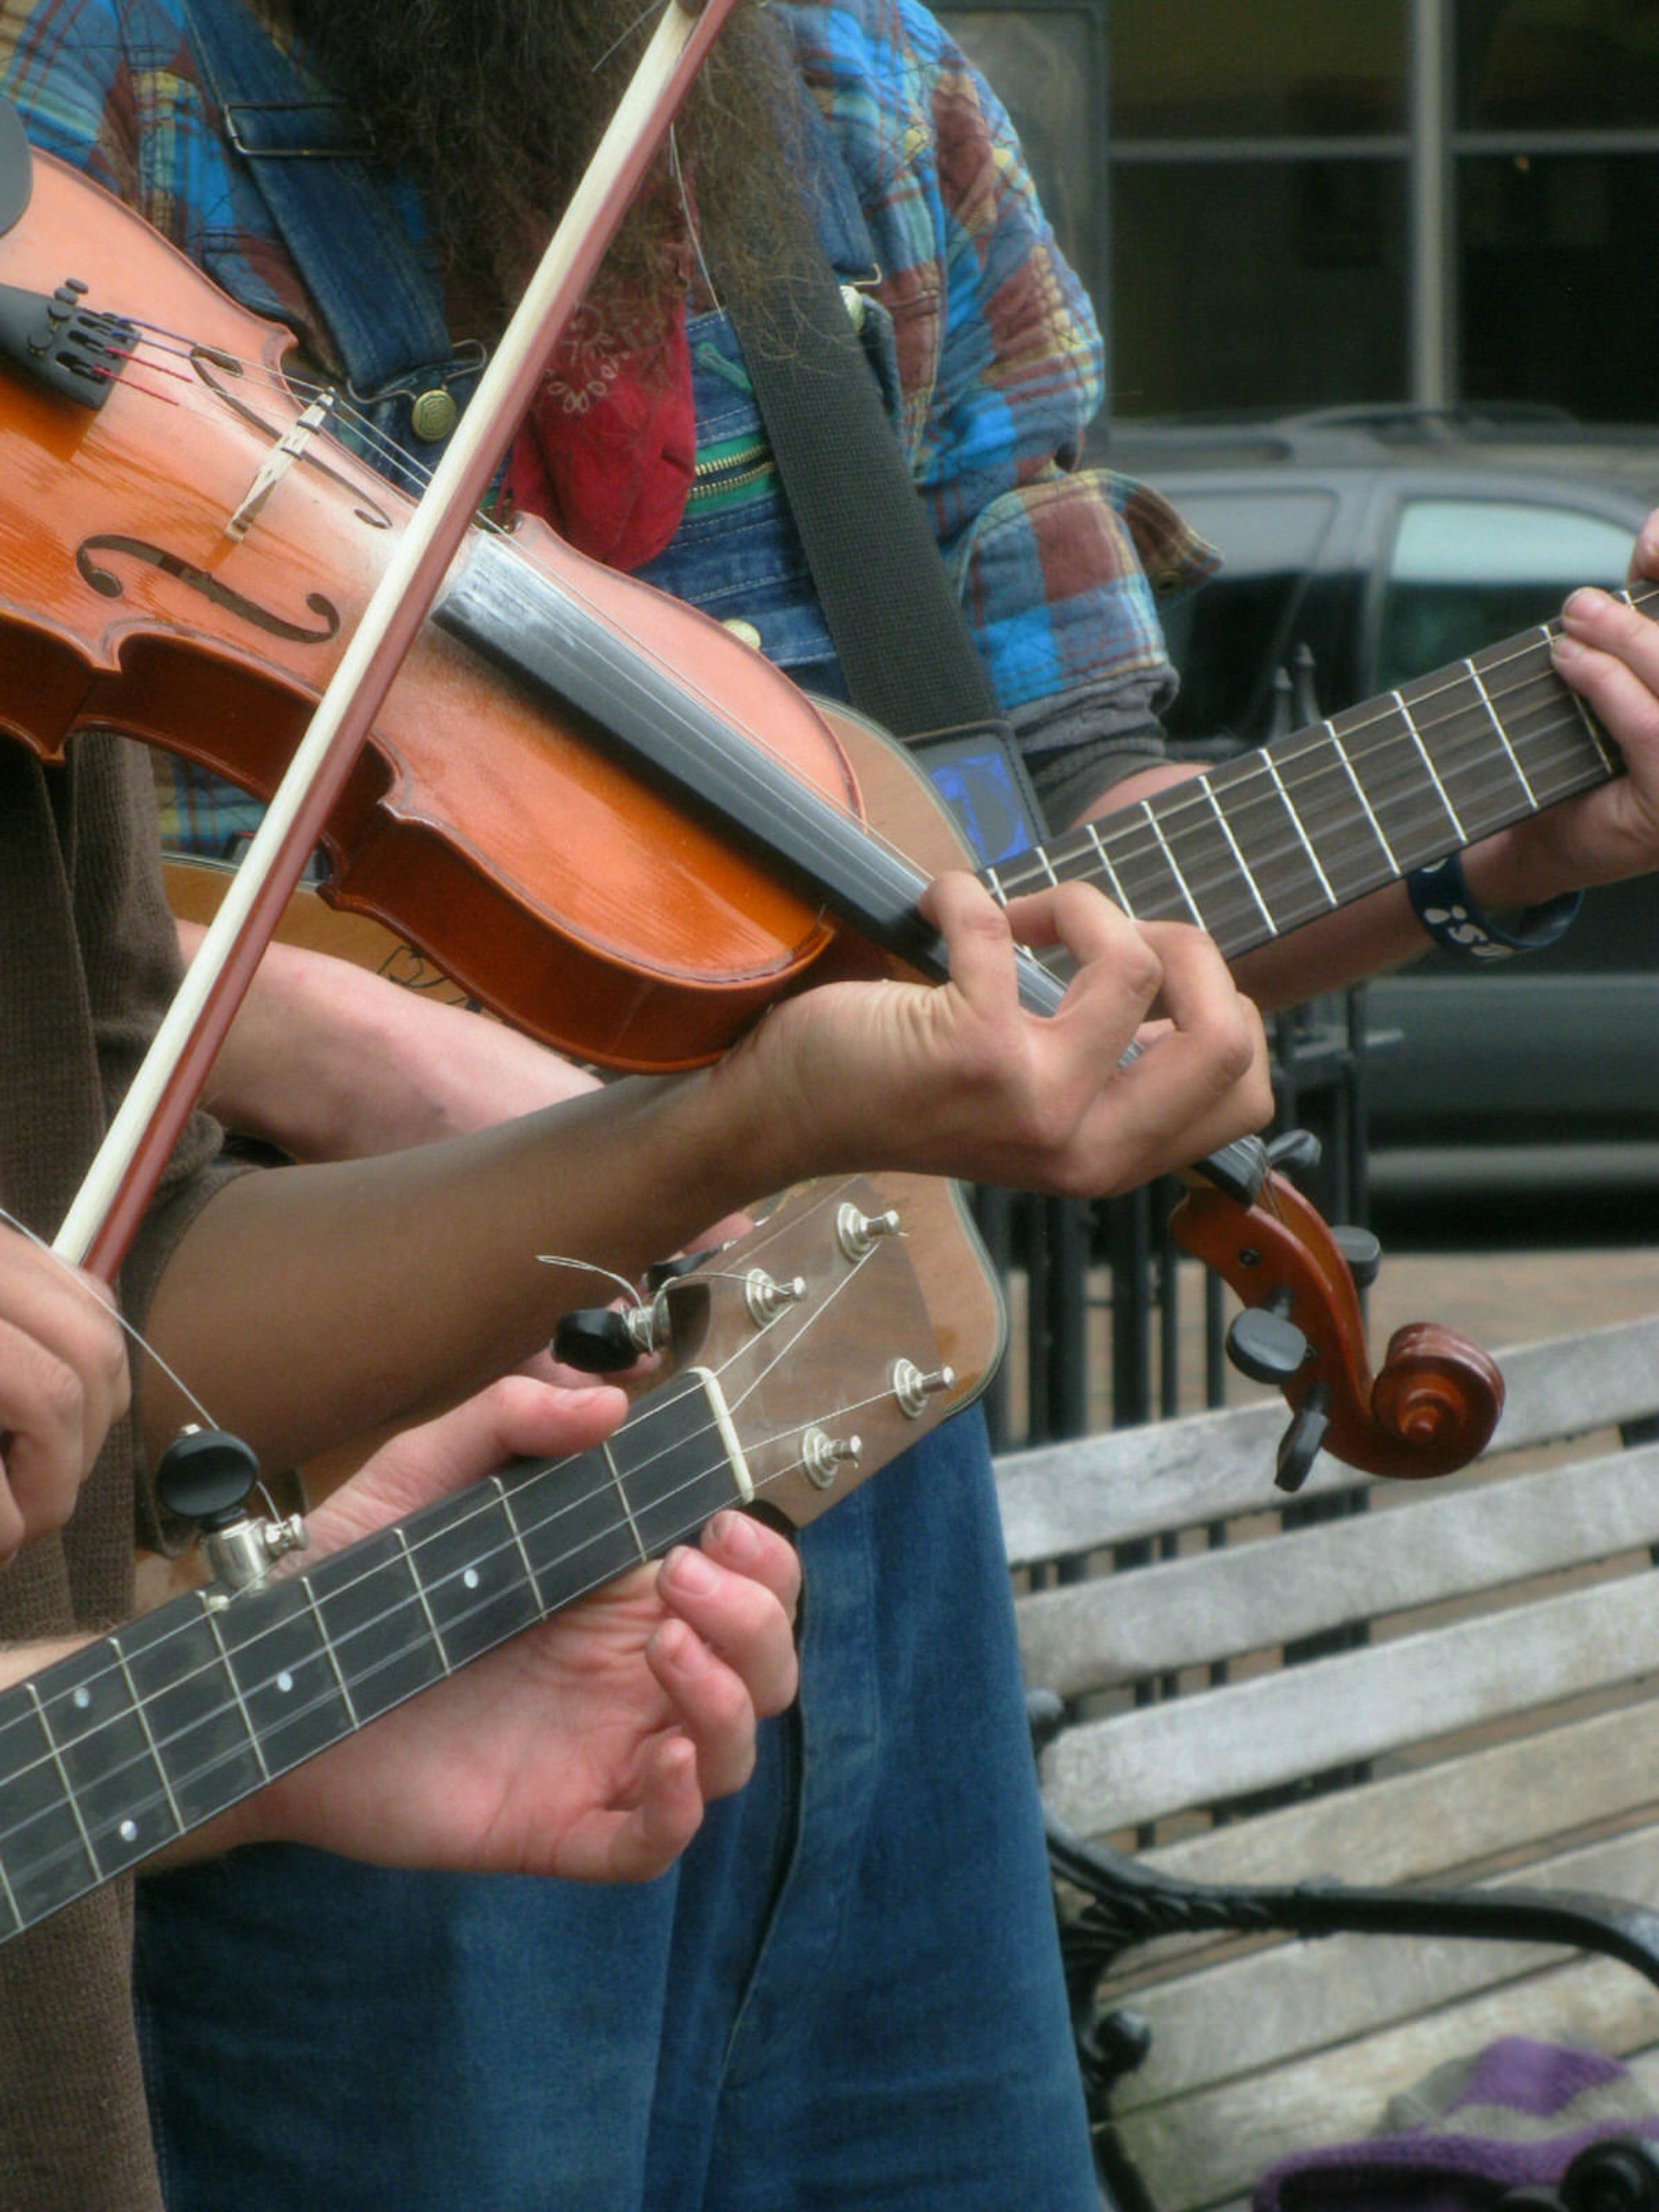 A close-up of a violin and two banjos, and the hands dancing across them, in a typical street scene in Asheville, North Carolina, where busking is part of the thriving music scene..